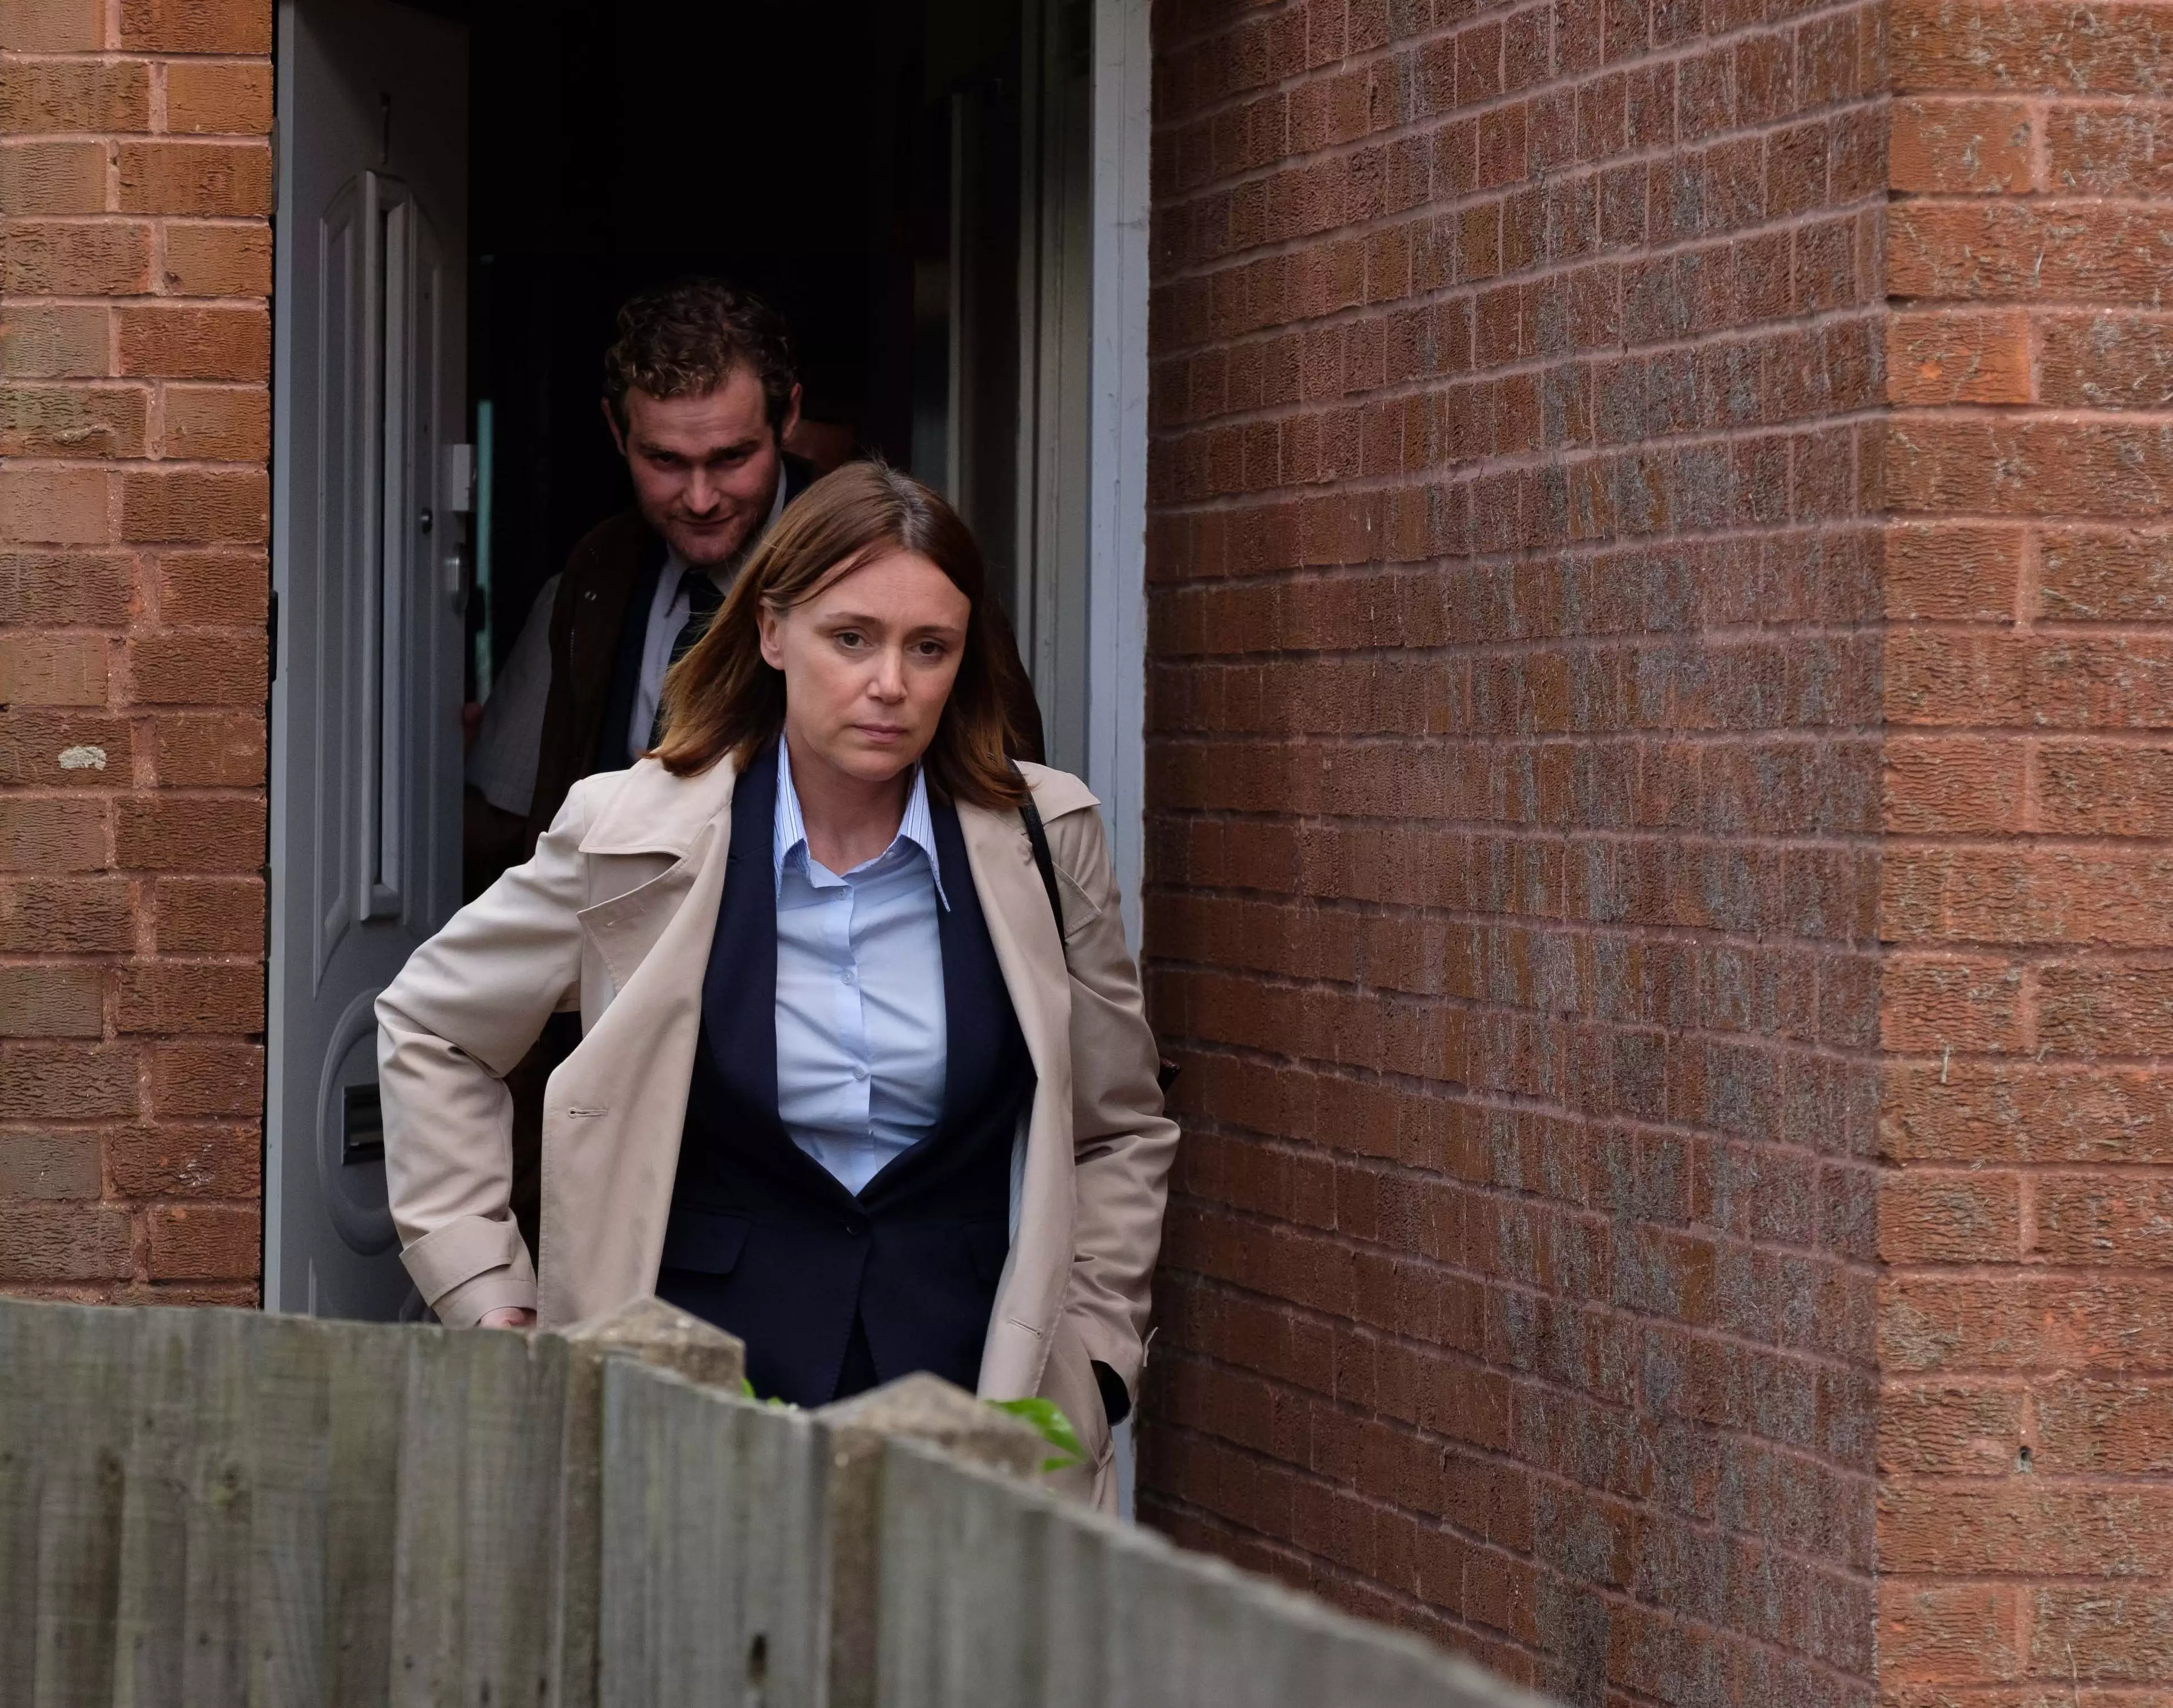 Keeley Hawes is starring in the drama (